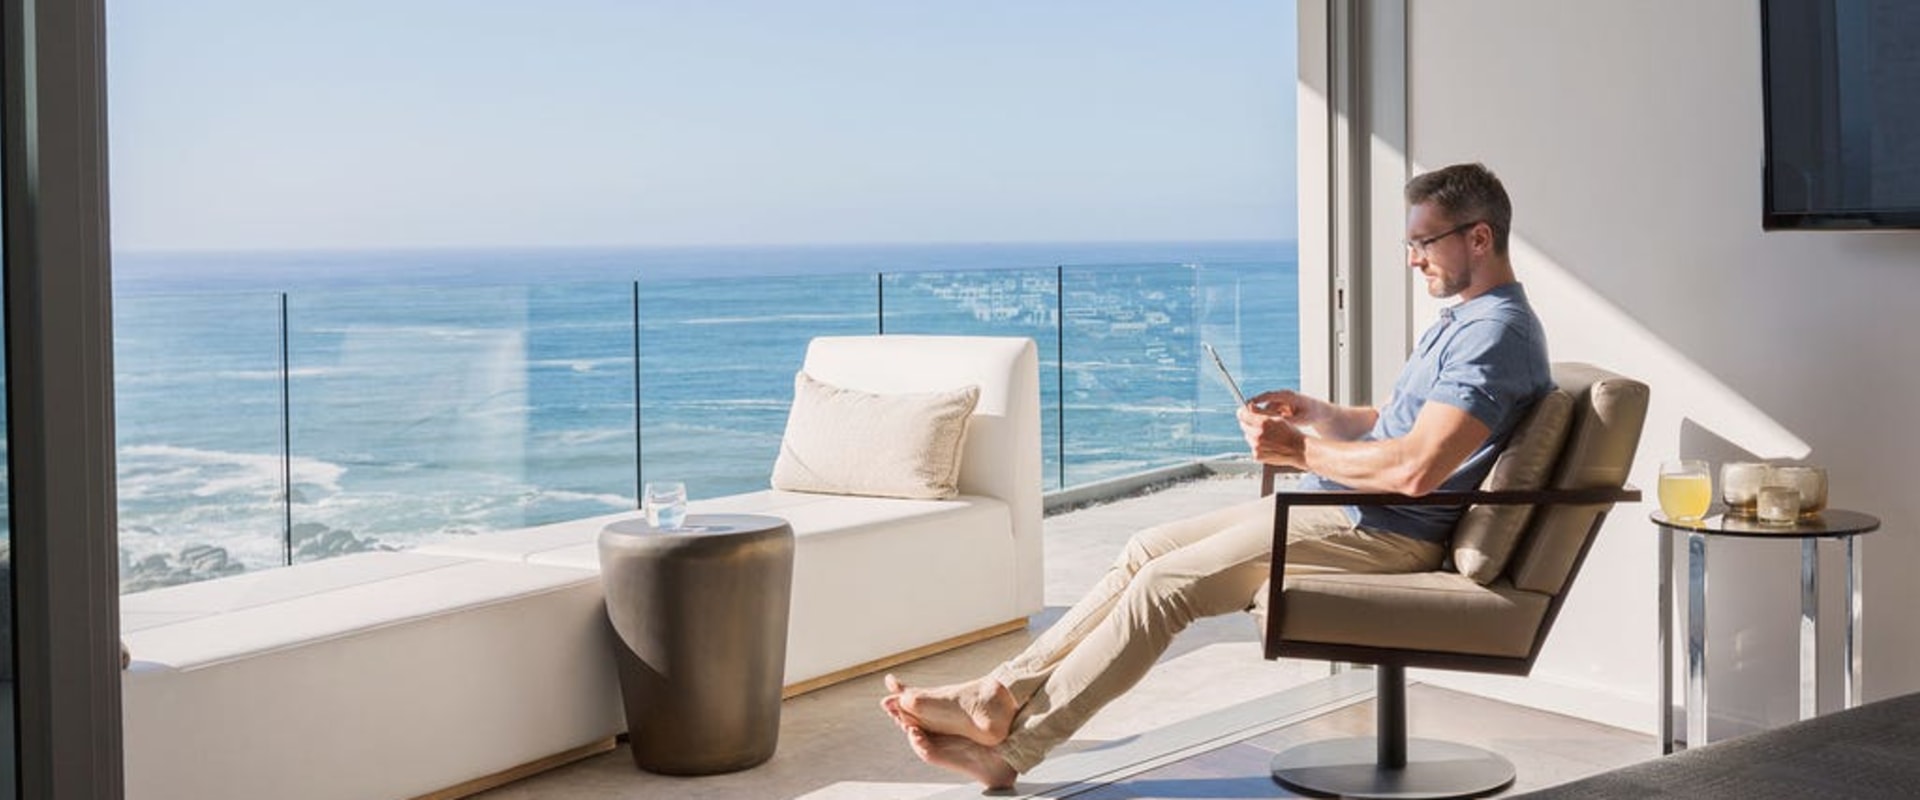 Living in a Beach House: Pros and Cons of Coastal Living